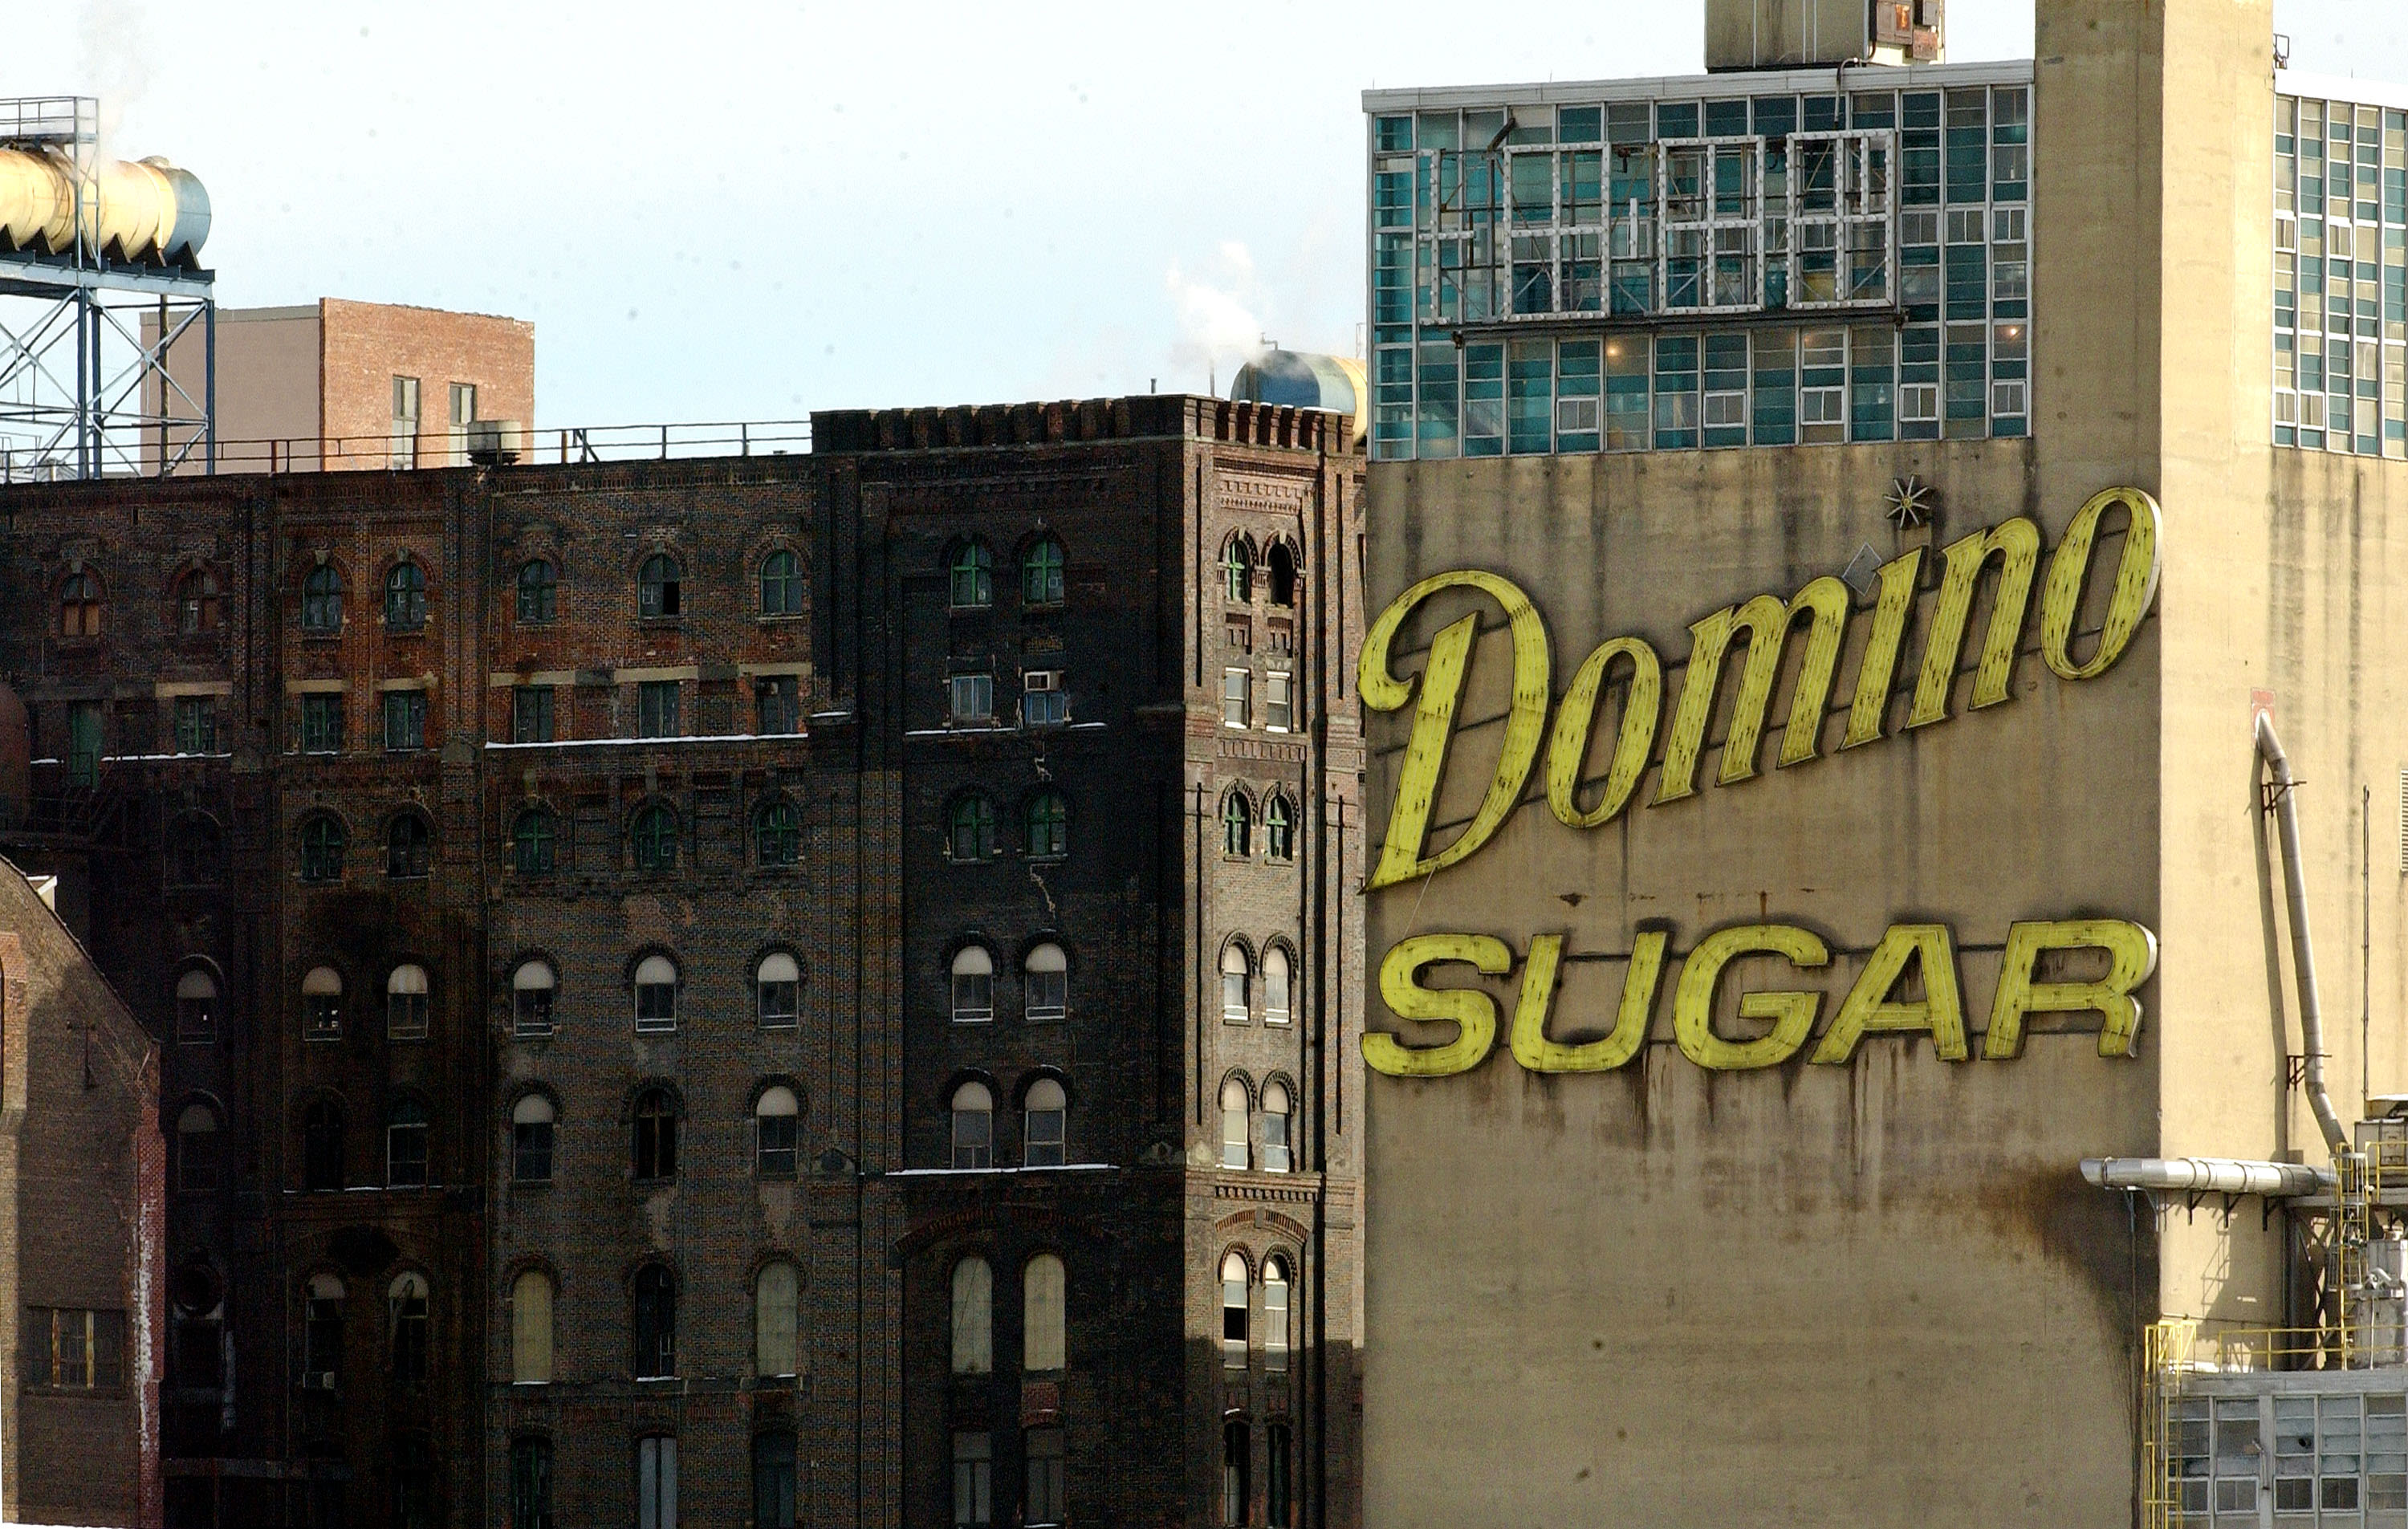 Brooklyn’s Iconic Domino Sugar Sign Gets a Second Life as an Art Installation